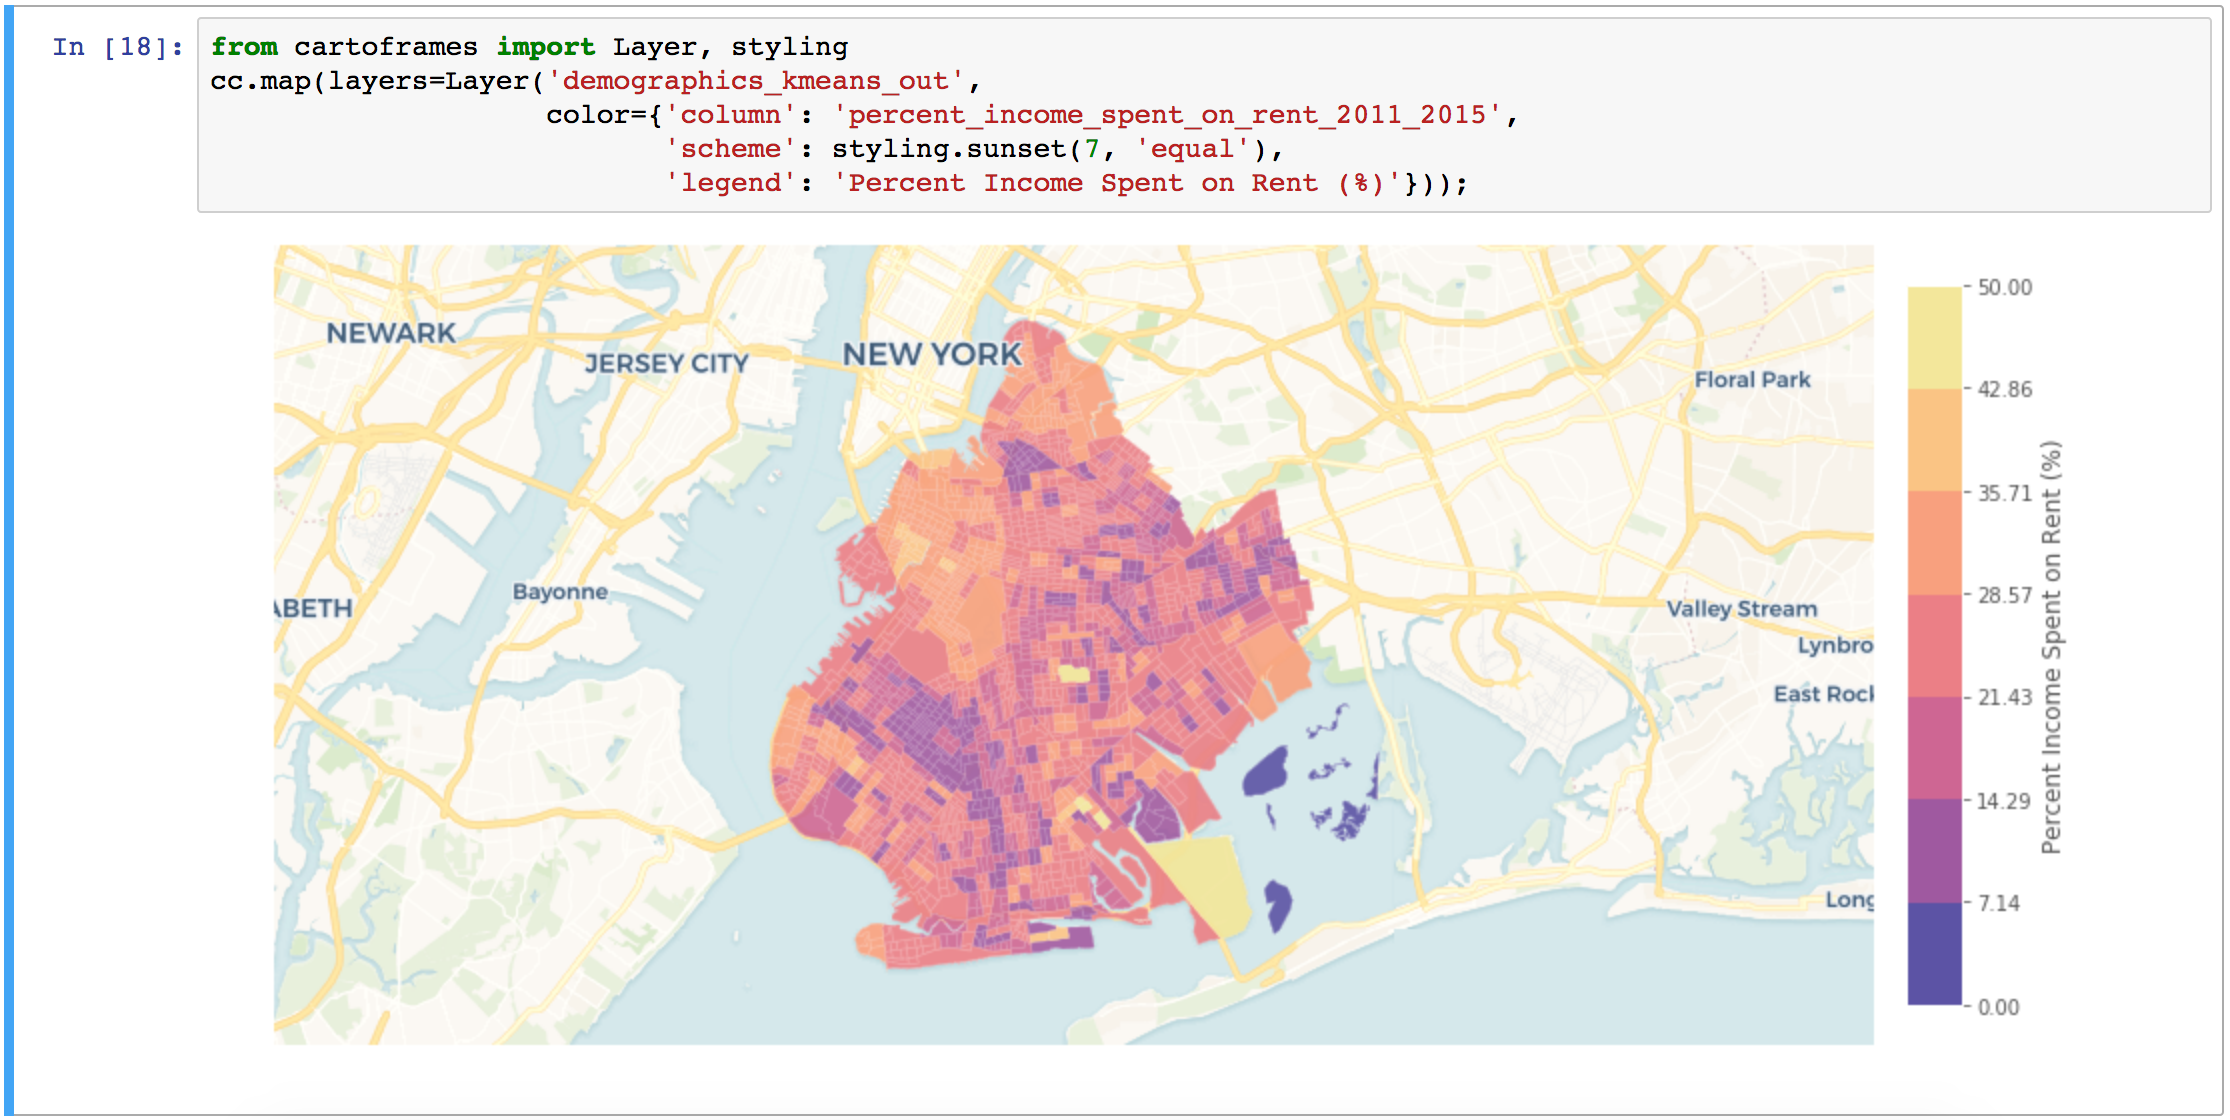 How to Add GIS to your Data Science Skills